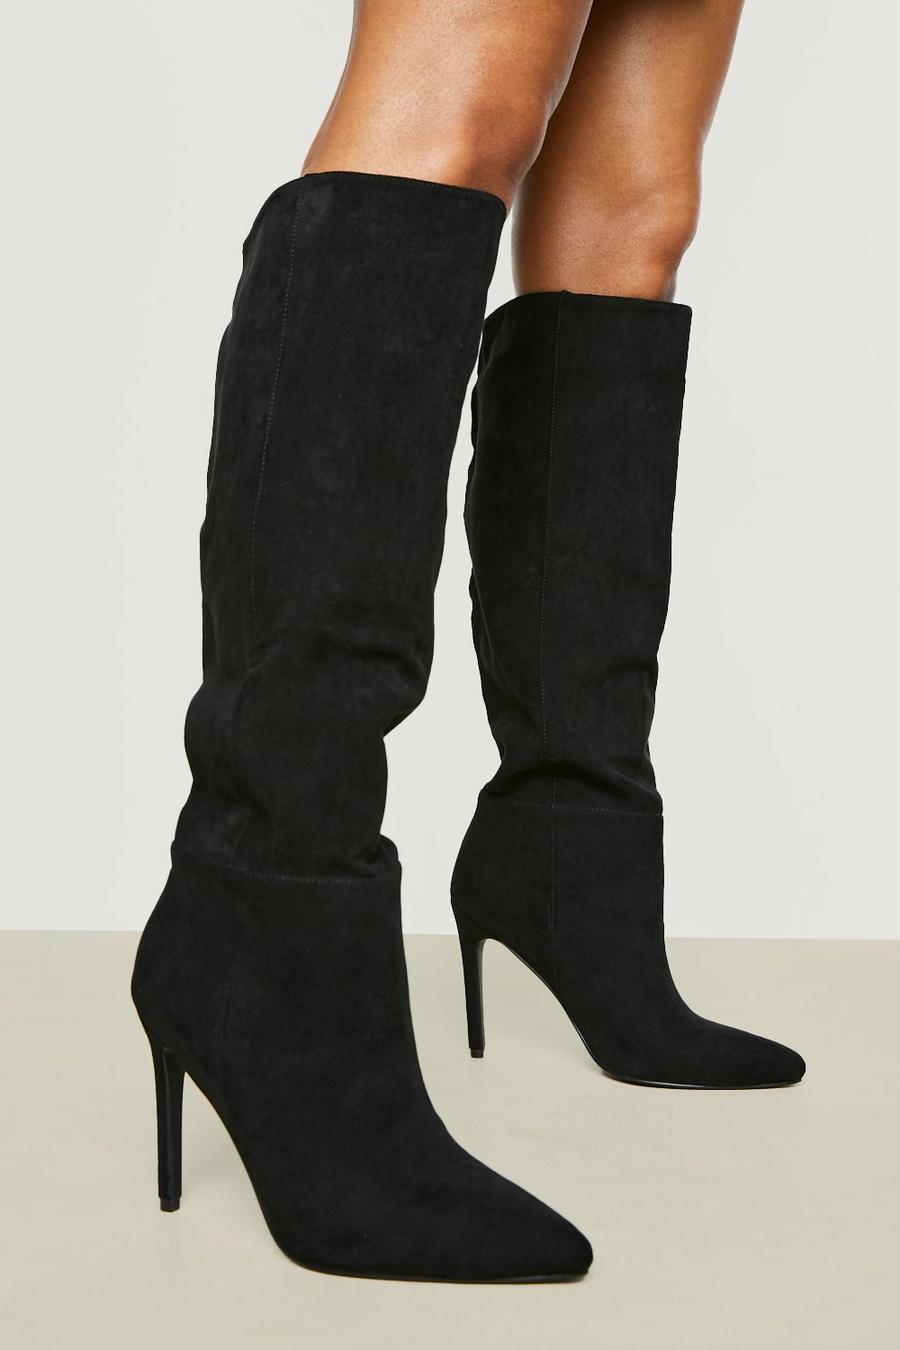 Black Pointed Knee High Stiletto Heeled Boots image number 1